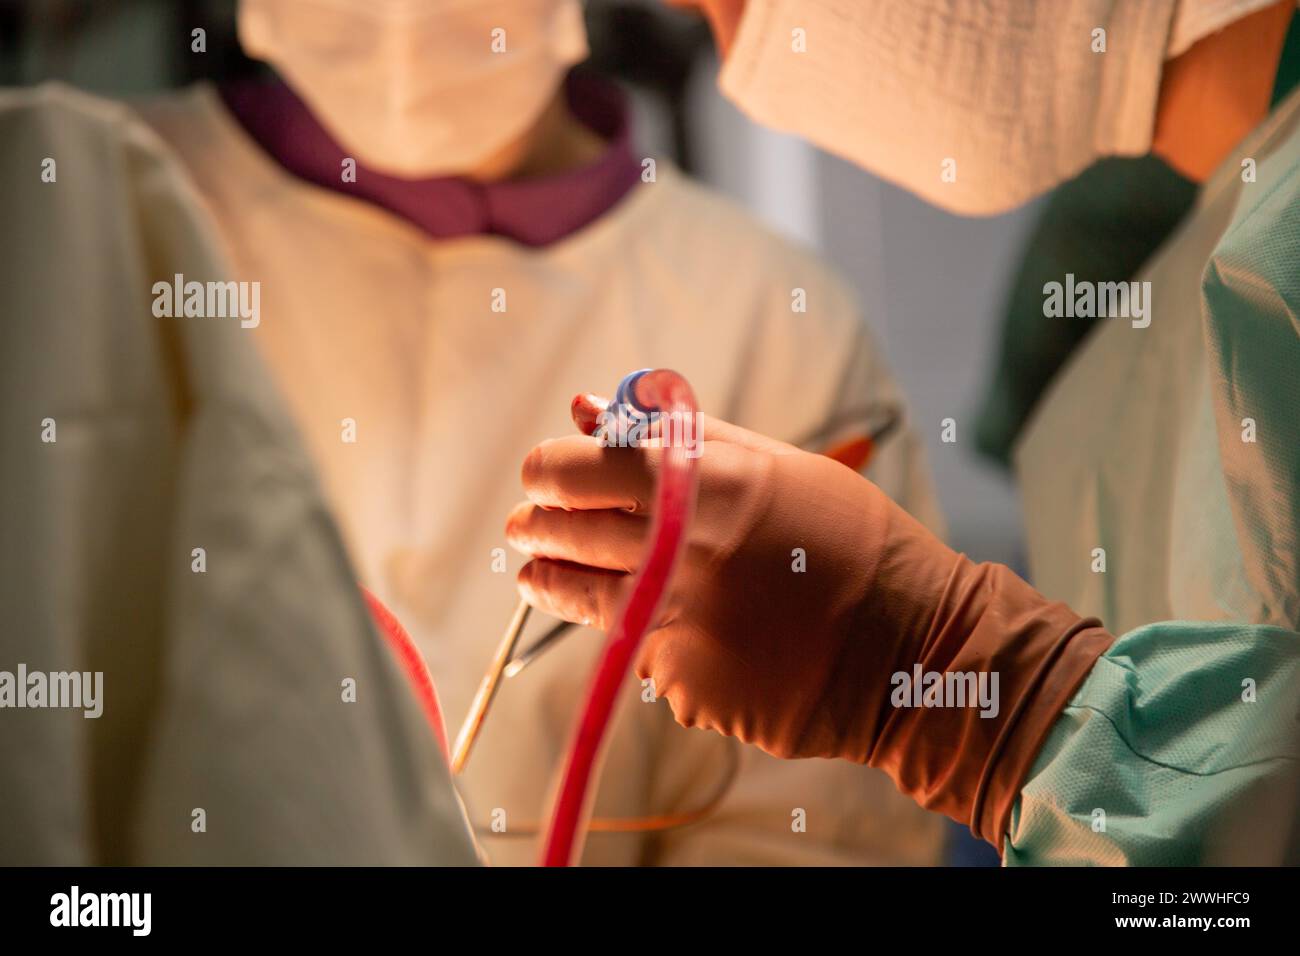 Surgeons perform an operation. Real photos from the operation. A real operating room. High quality photo Stock Photo